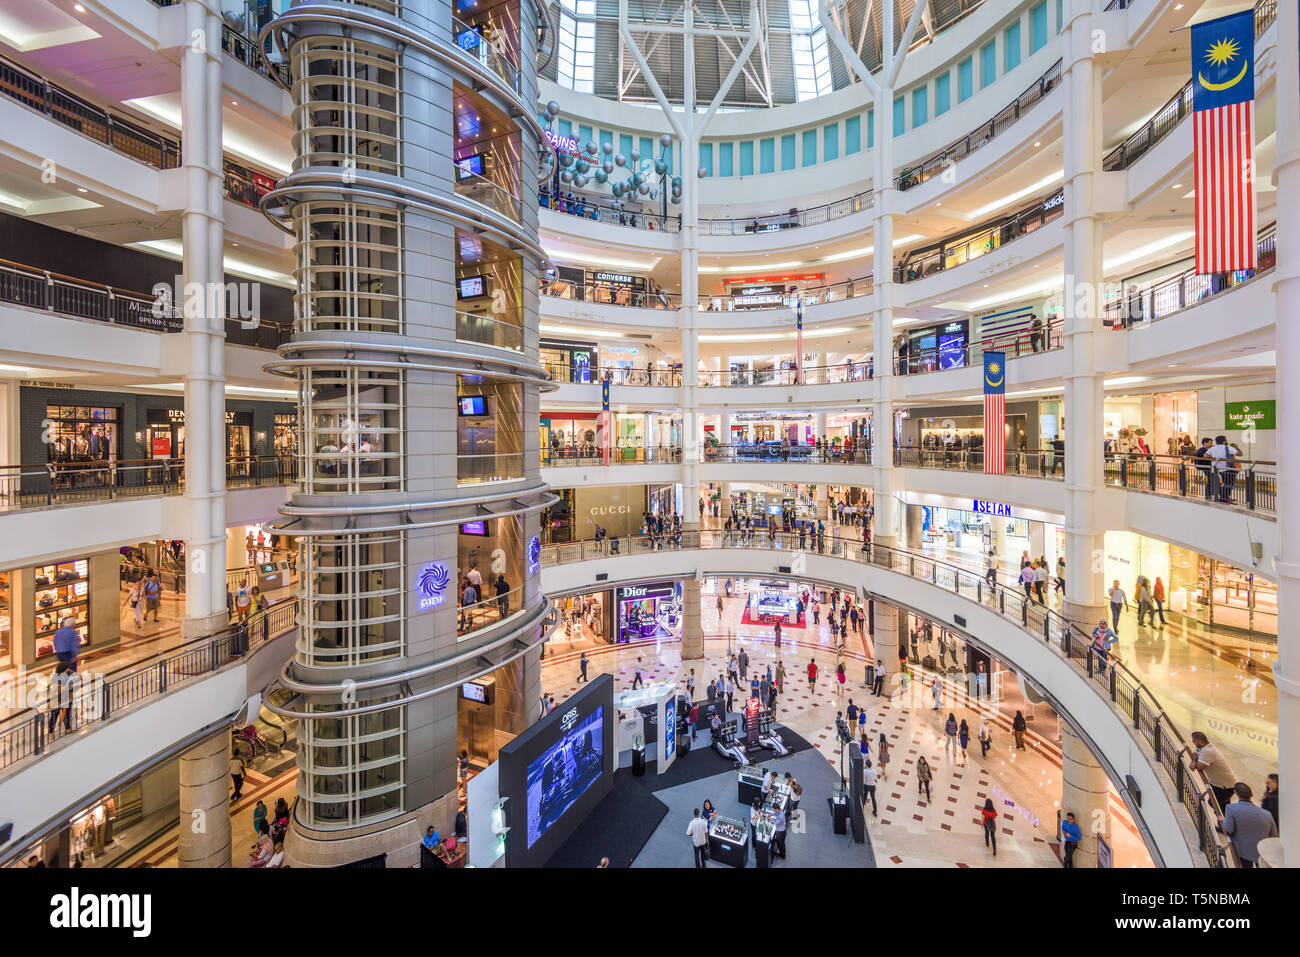 KUALA LUMPUR, MALAYSIA - SEPTEMBER 16, 2015: Suria KLCC Mall in Kuala Lumpur. Opened in May 1998, the shopping mall was conceived as part of the Petro Stock Photo